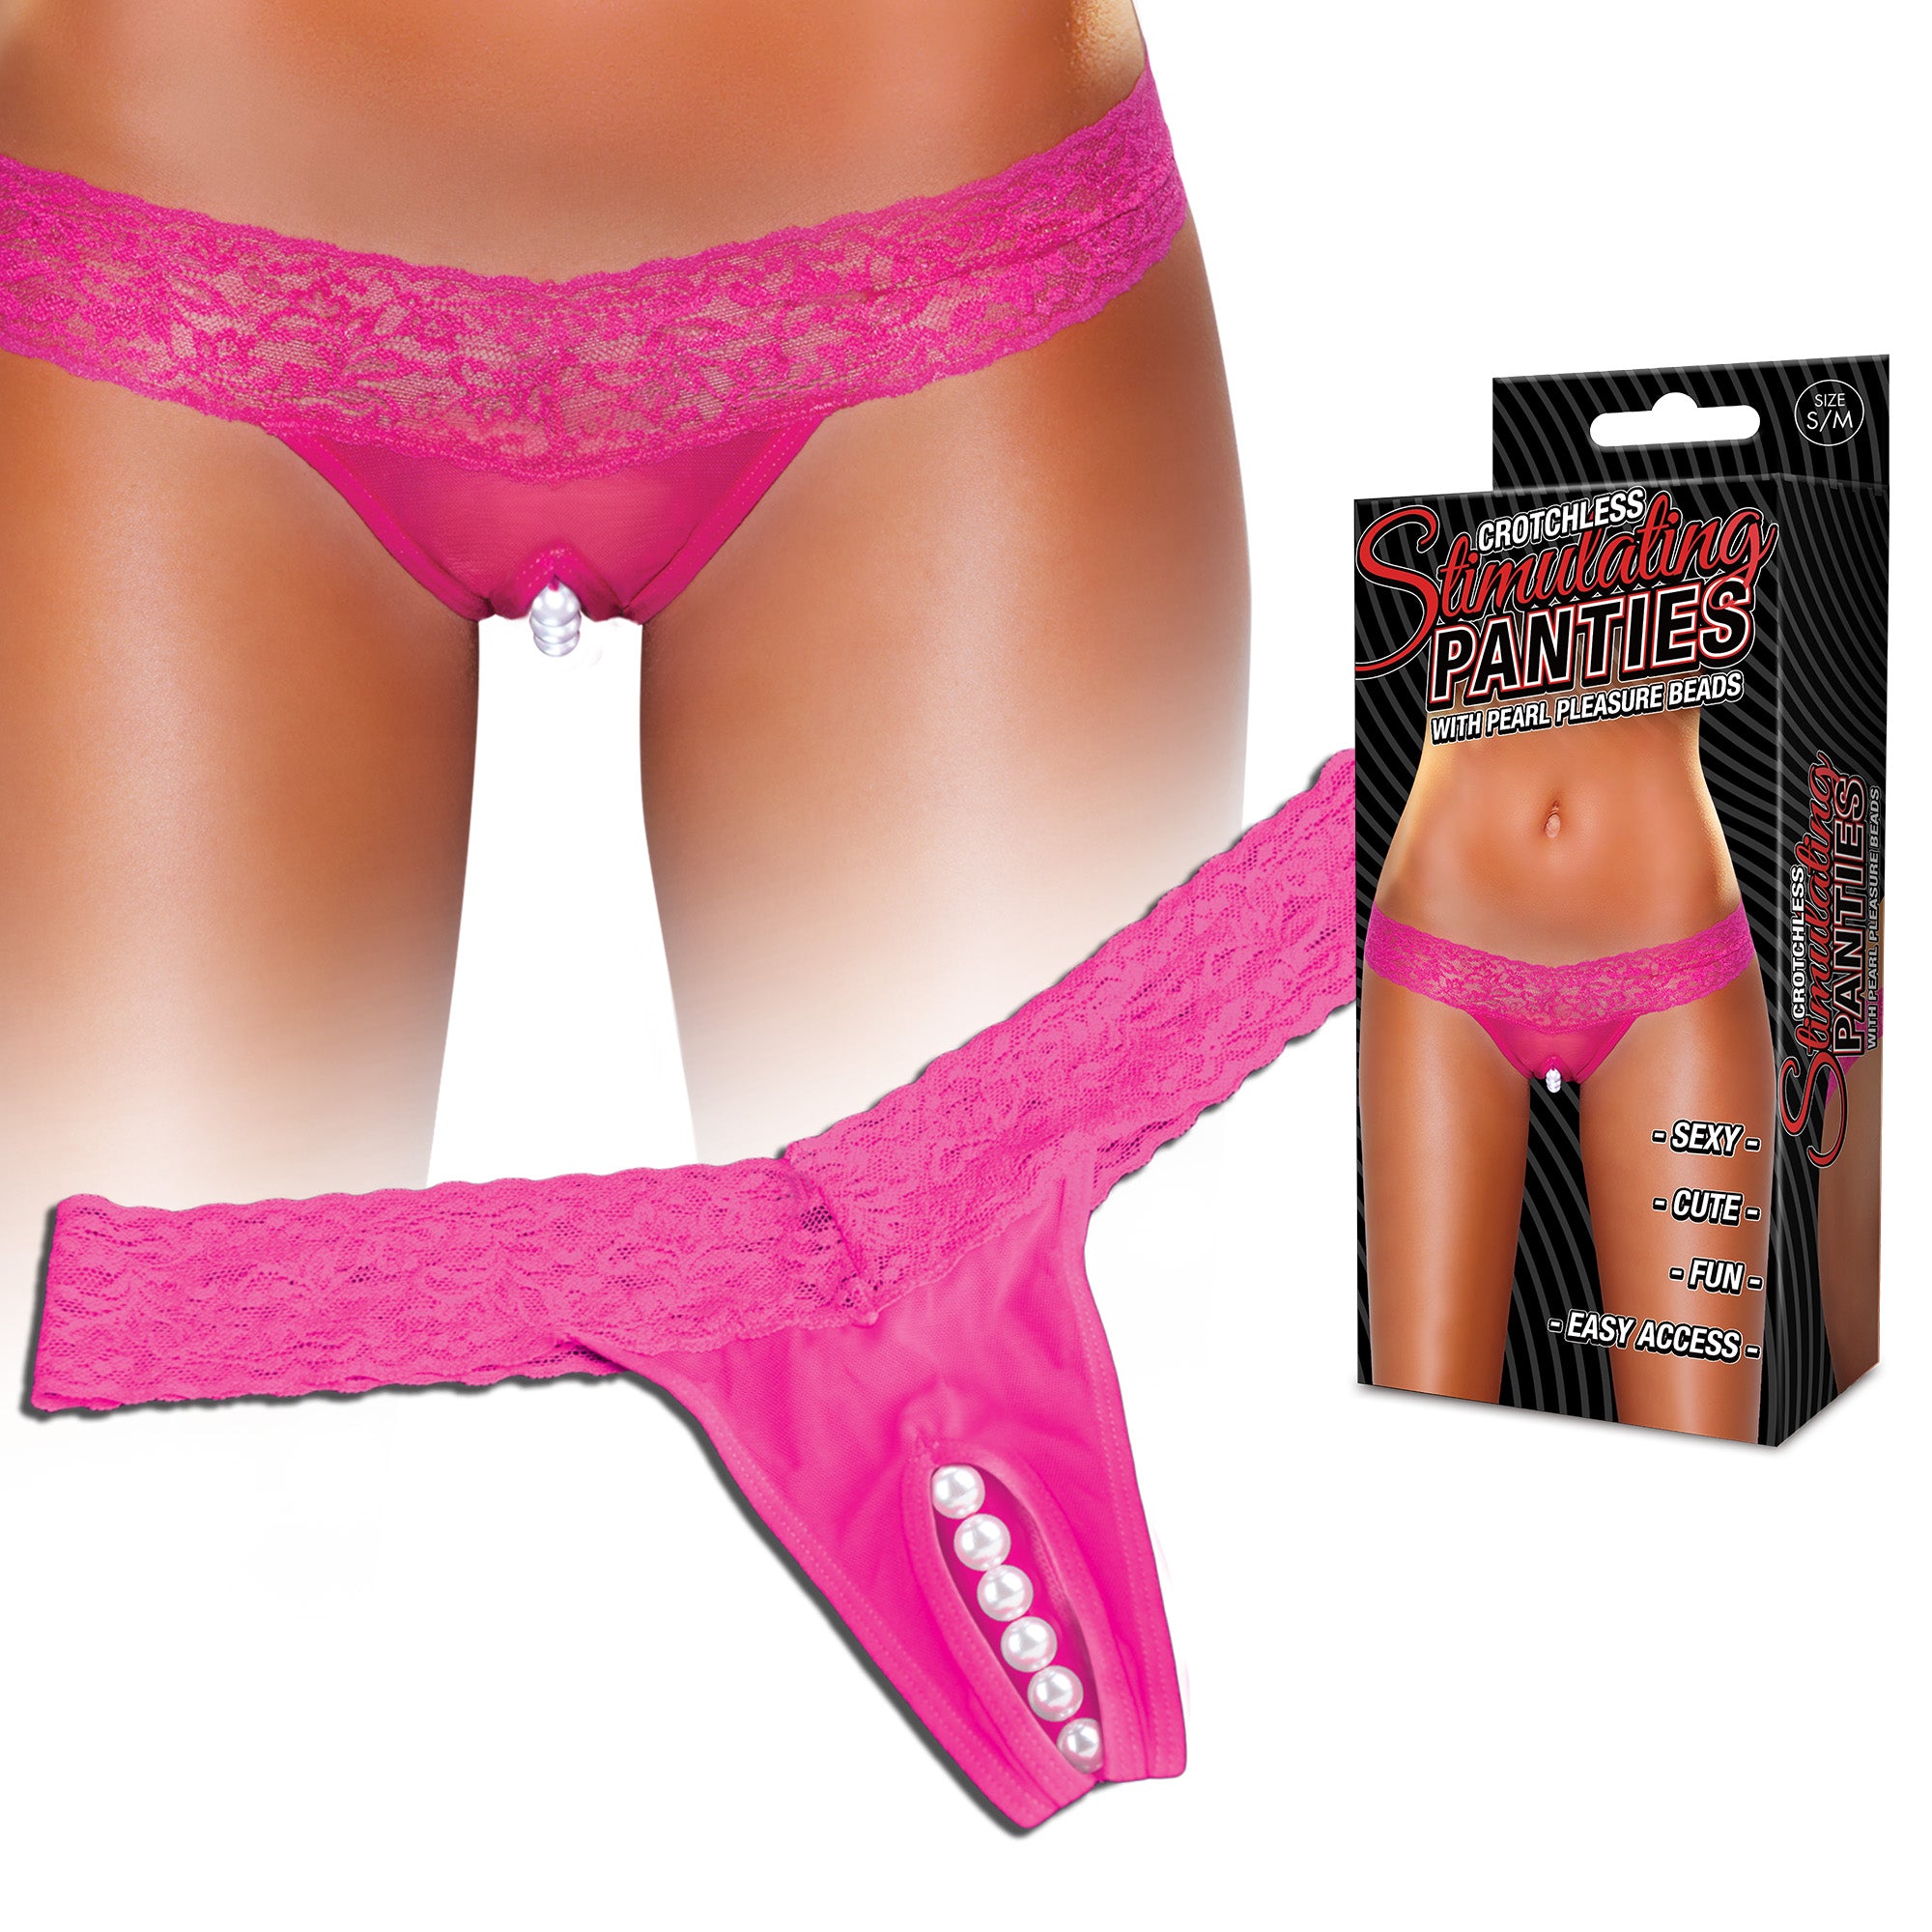 Crotchless Stimulating Panties With Pearl Pleasure Beads - Hot Pink